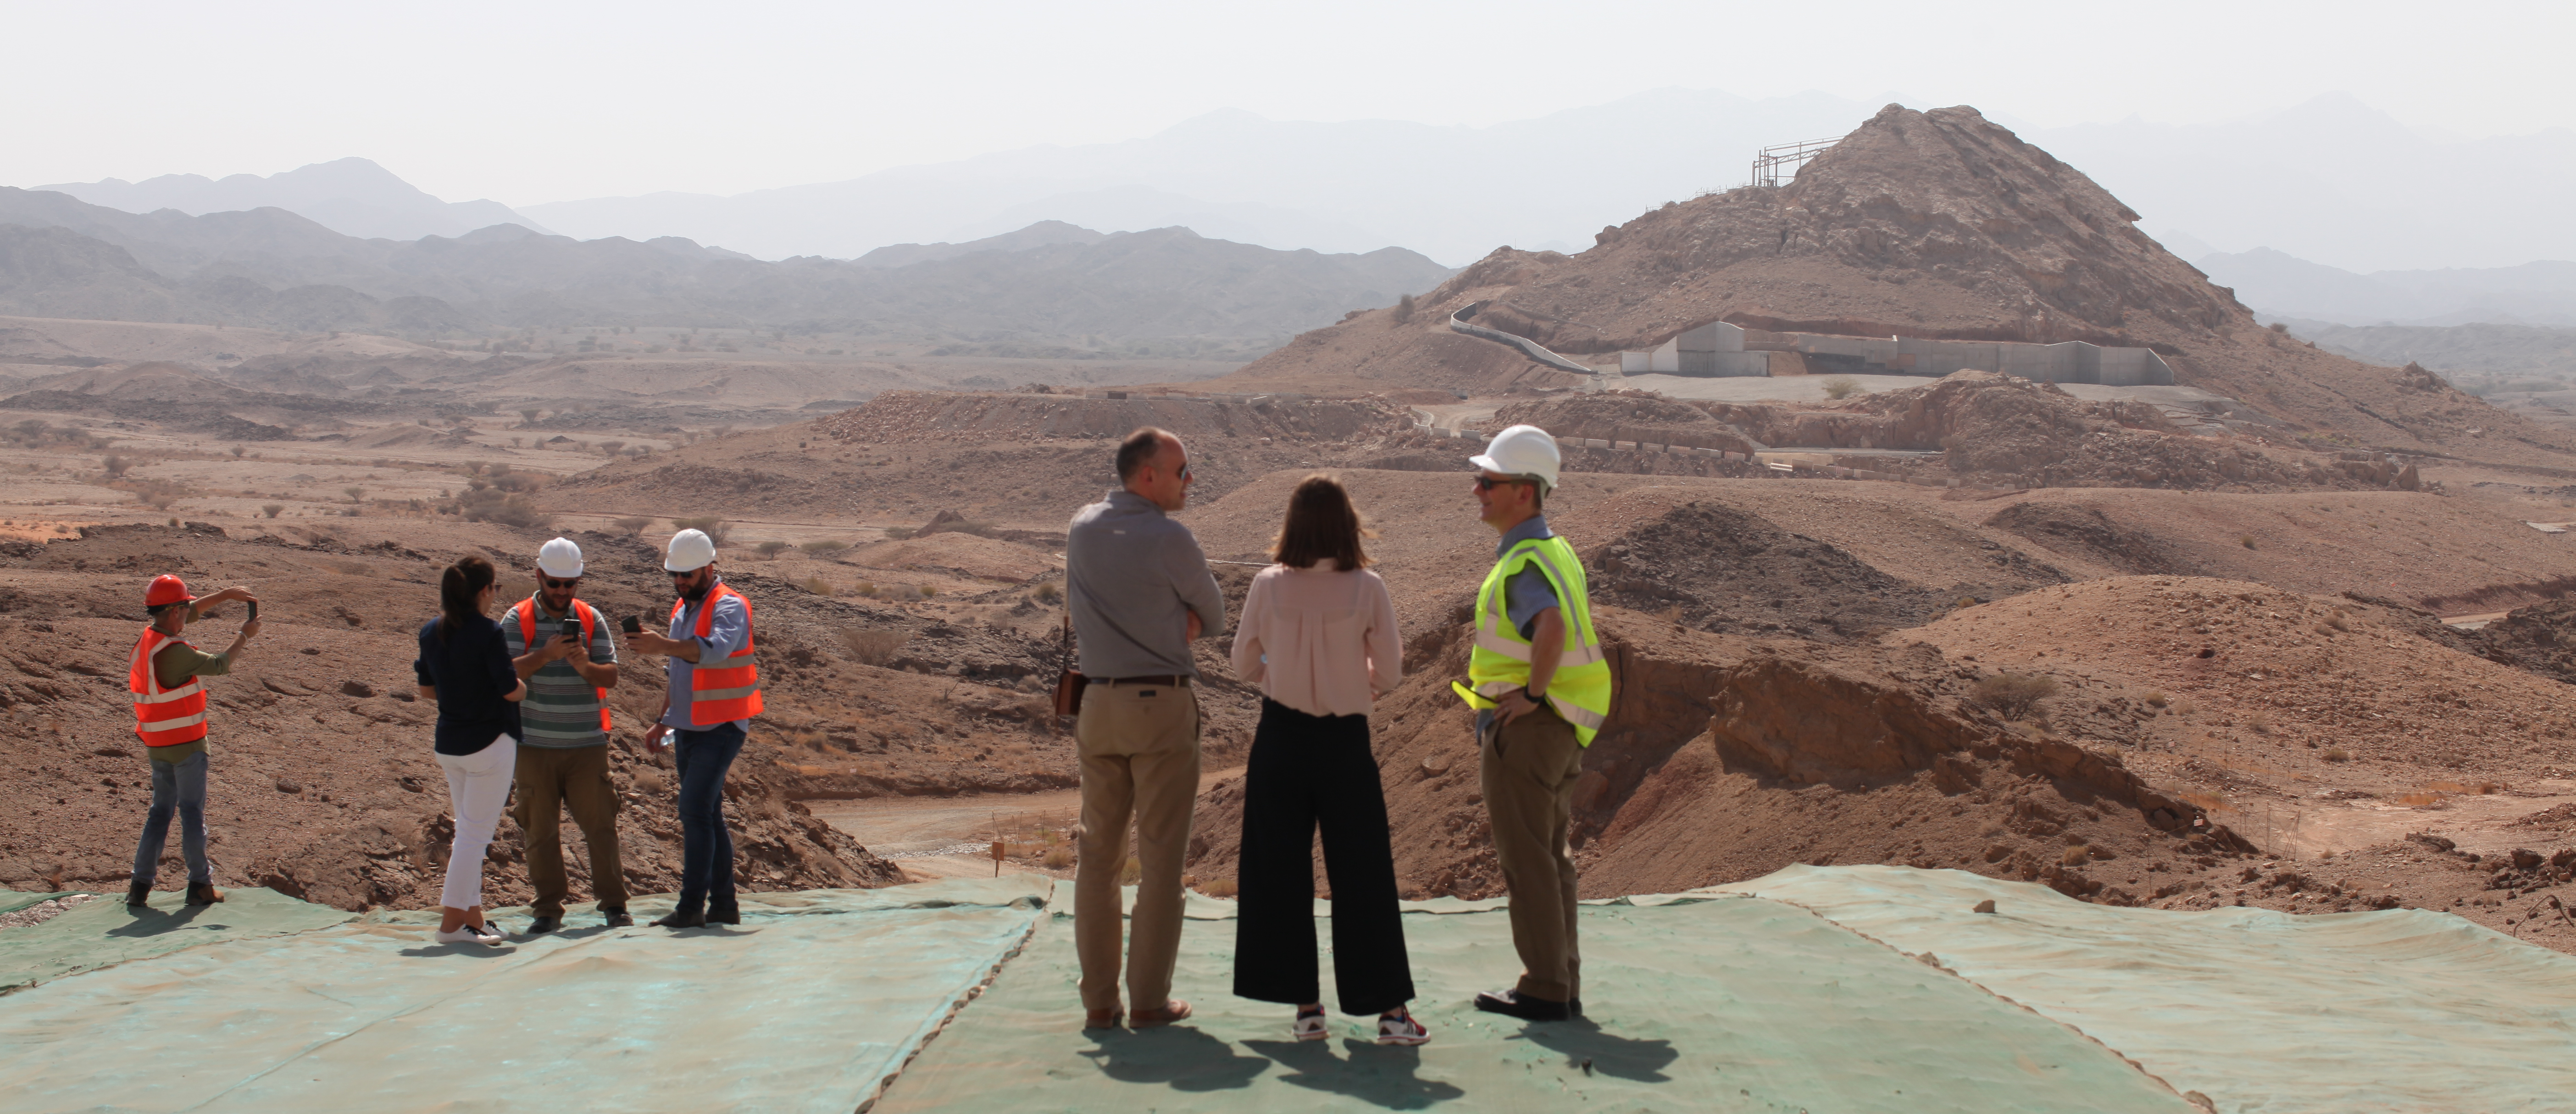 One day all this will be green - the site of the Oman Botanic Garden